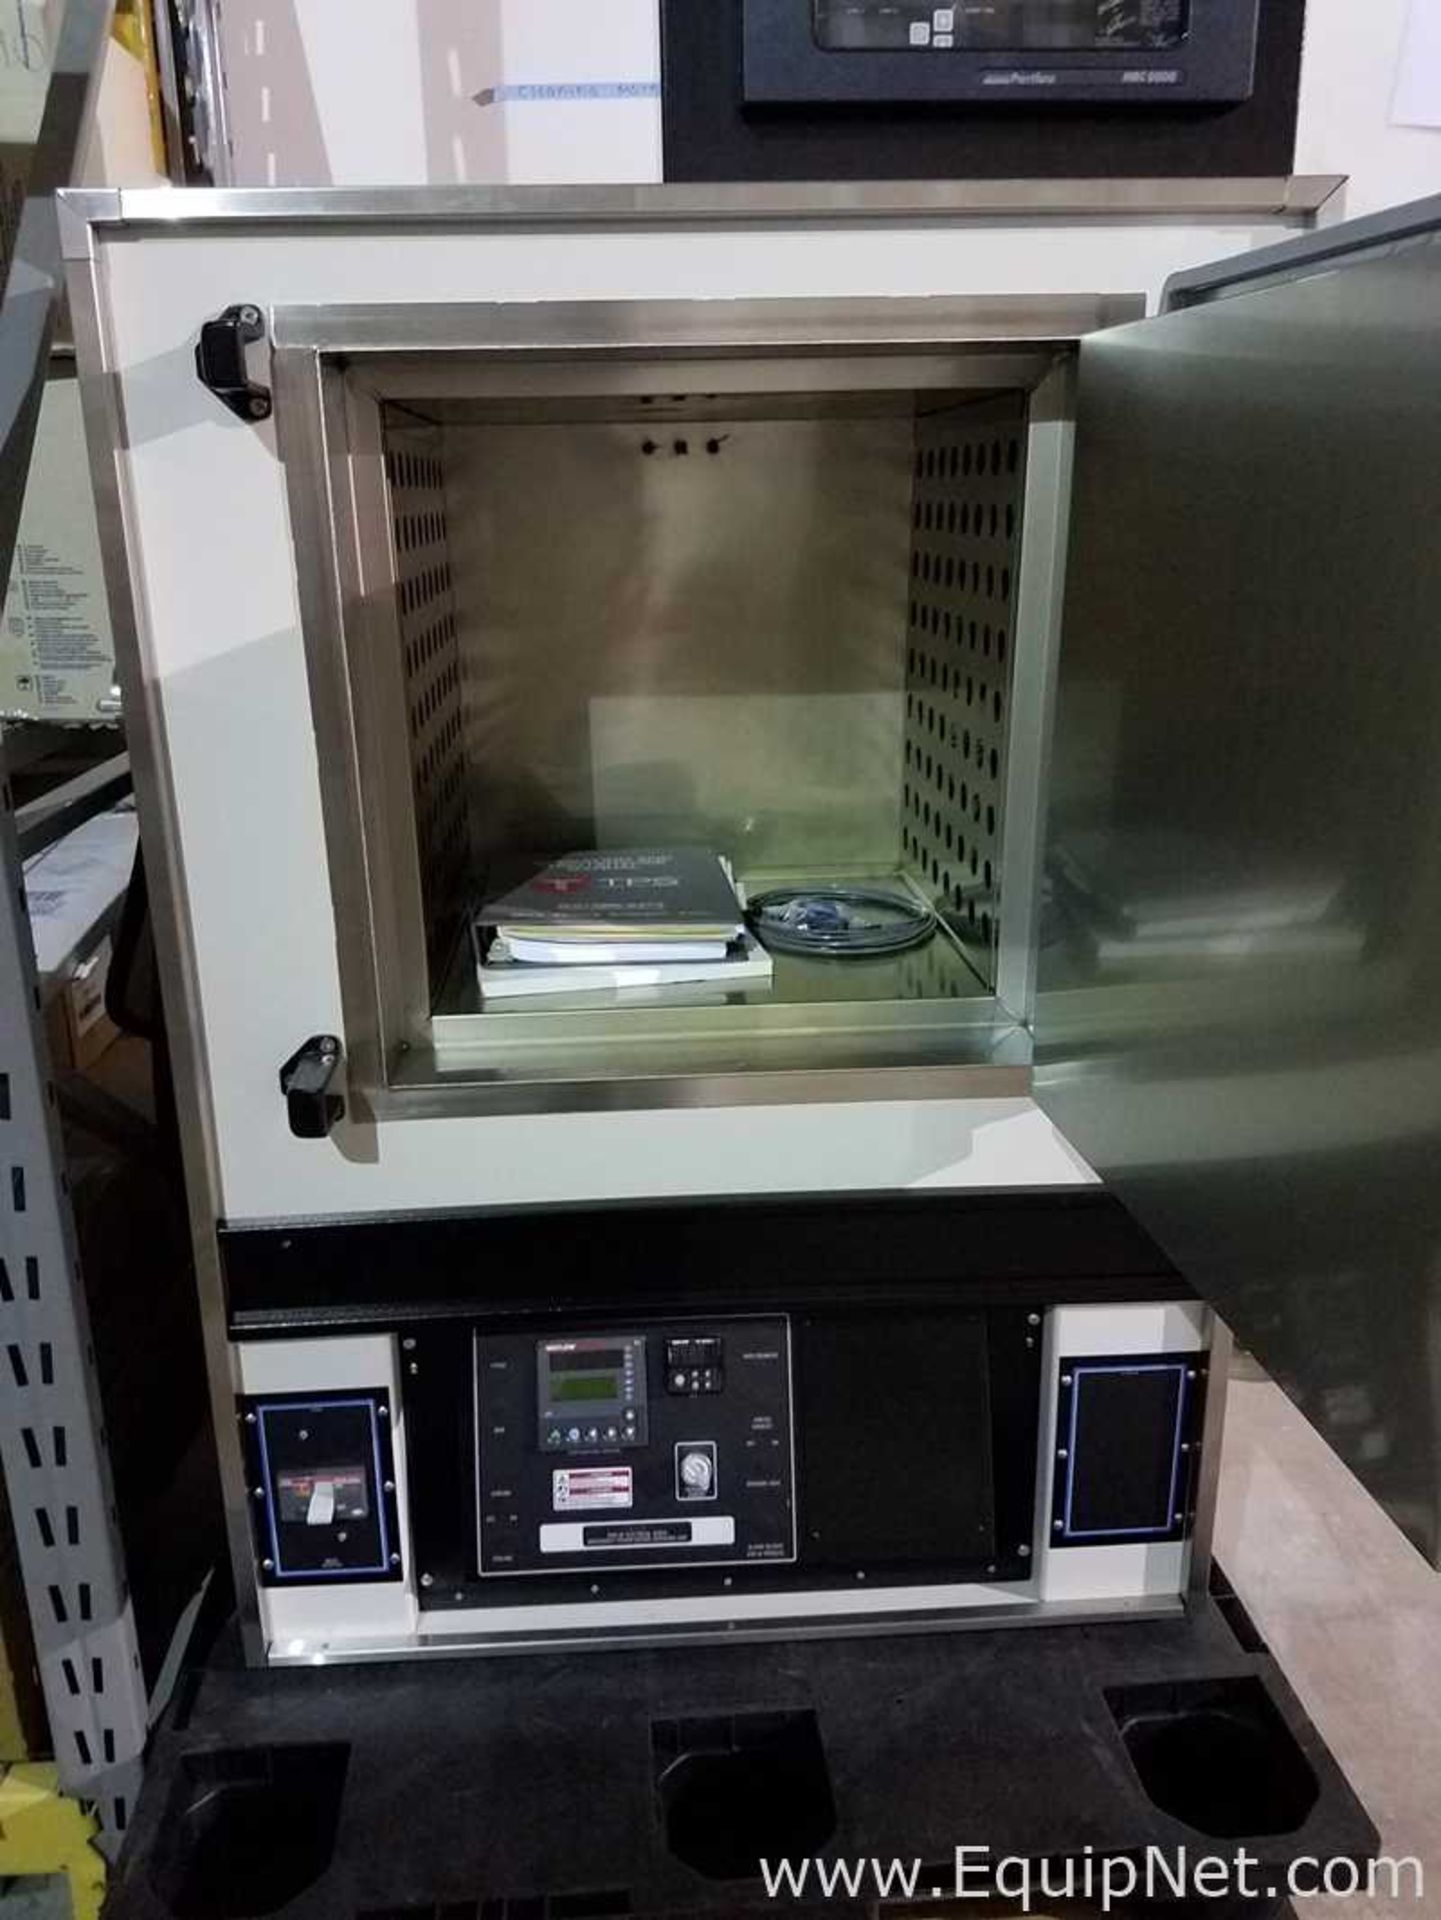 TPS DCW-206-F-F4 Mechanical Convection Oven - Image 5 of 6